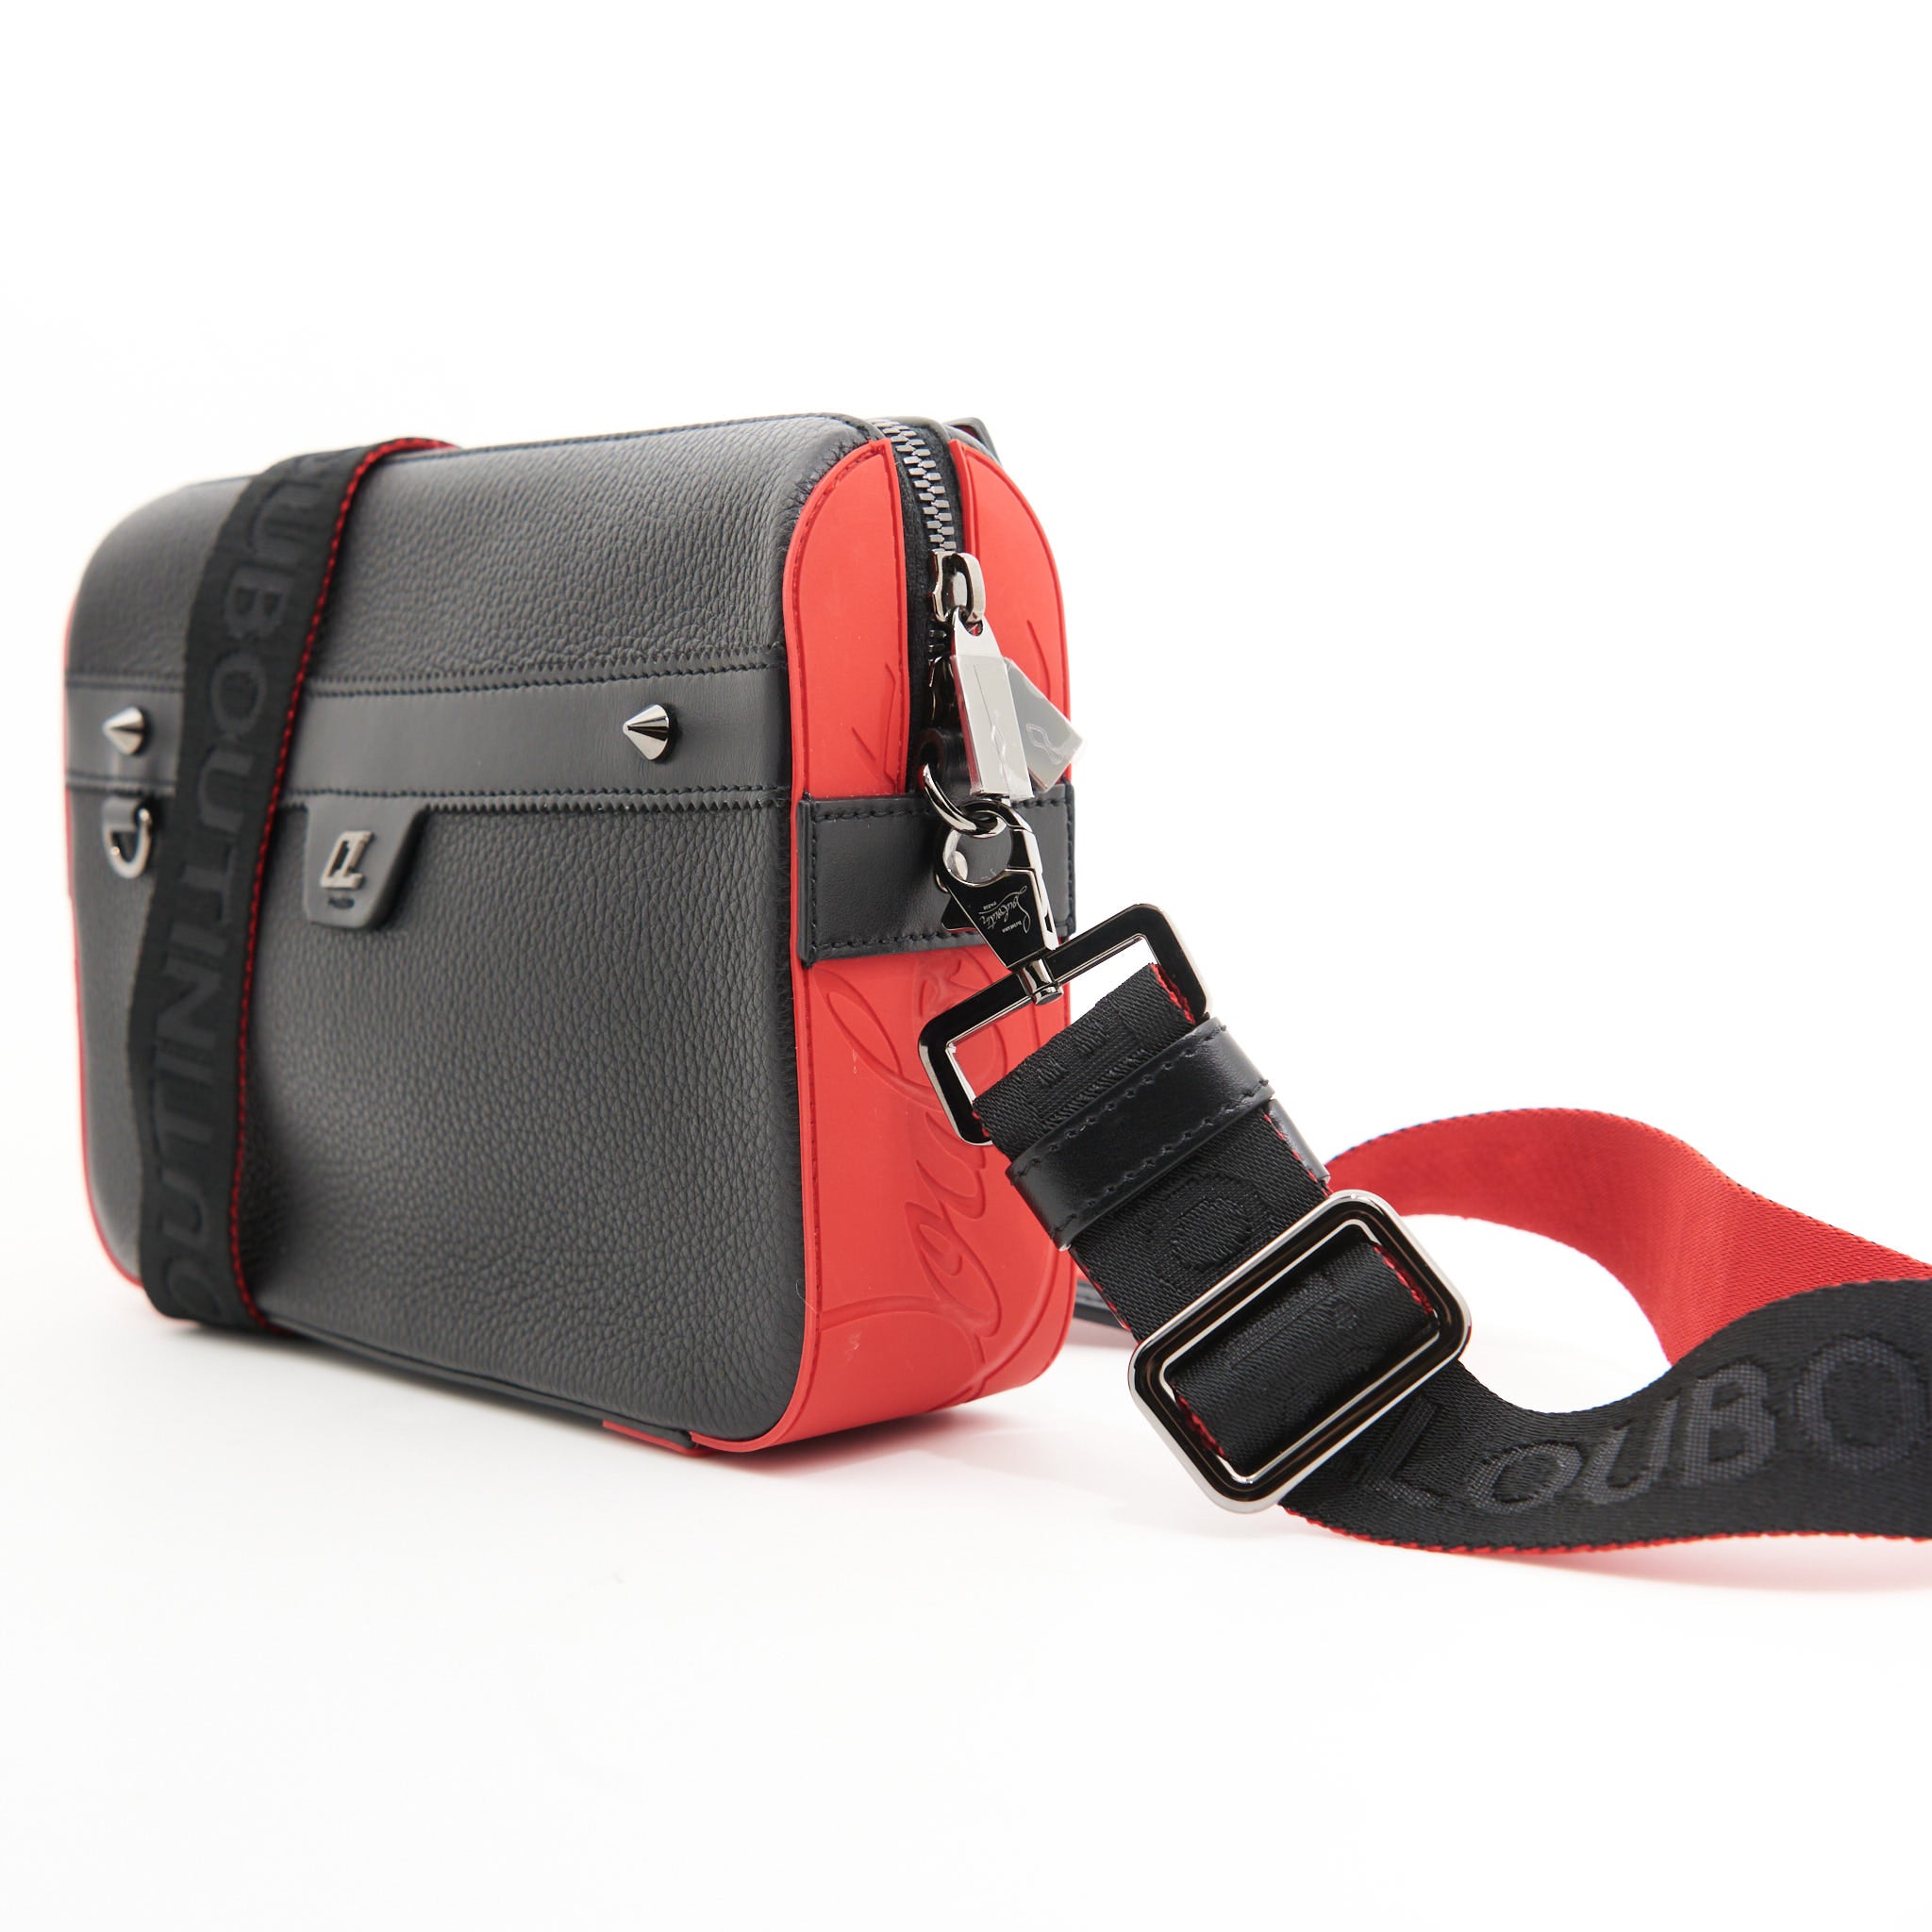 Christian Louboutin Ruisbuddy Messenger Bag in Black and Red